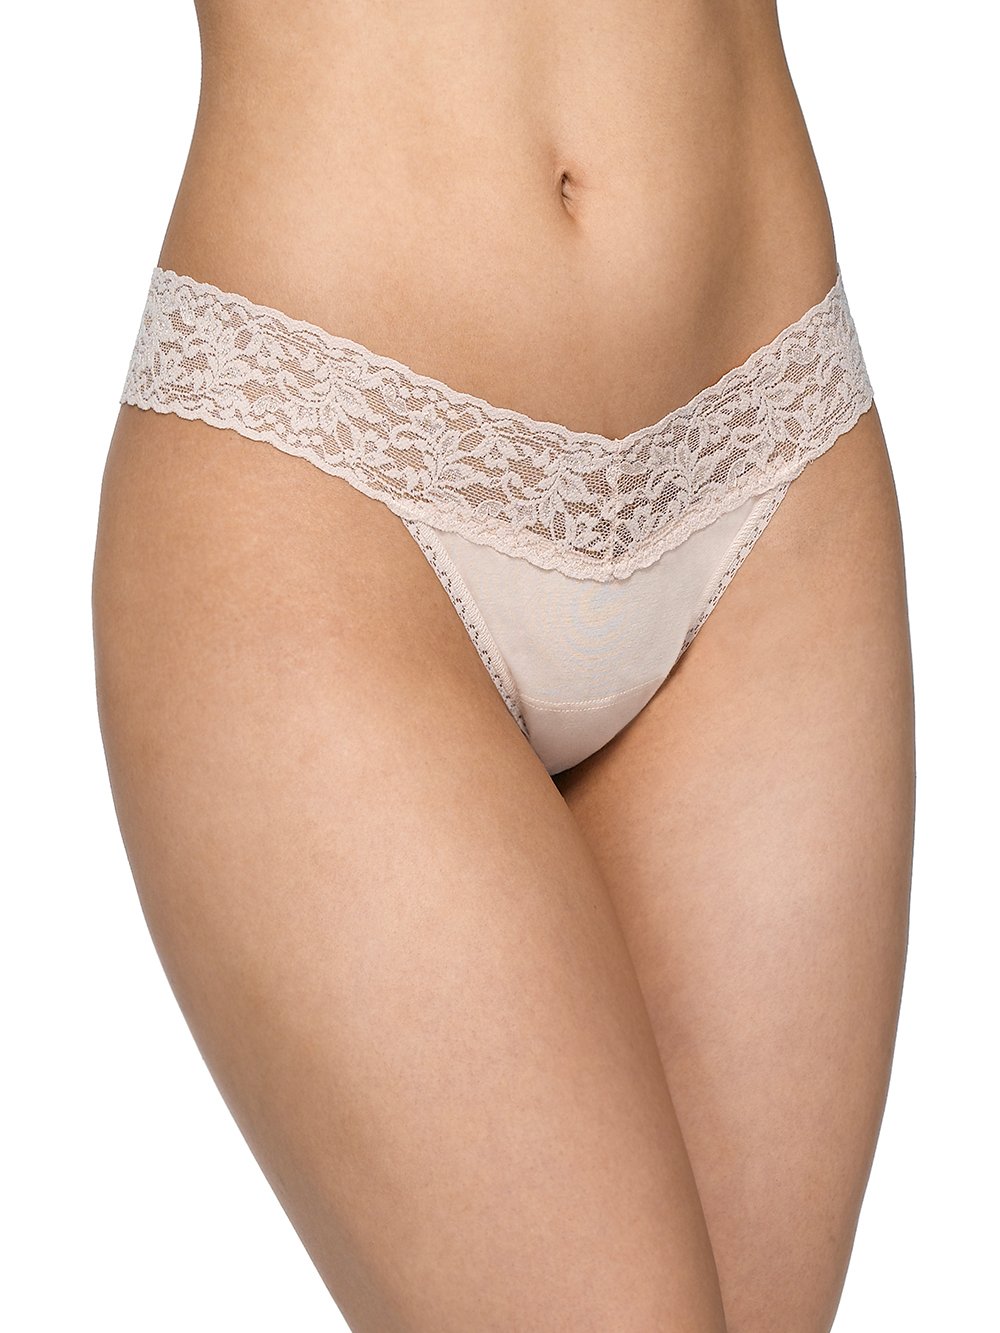 Hanky Panky Thong Chai / One Size SUPIMA® Cotton *Petite Size* Low Rise Thong with Lace